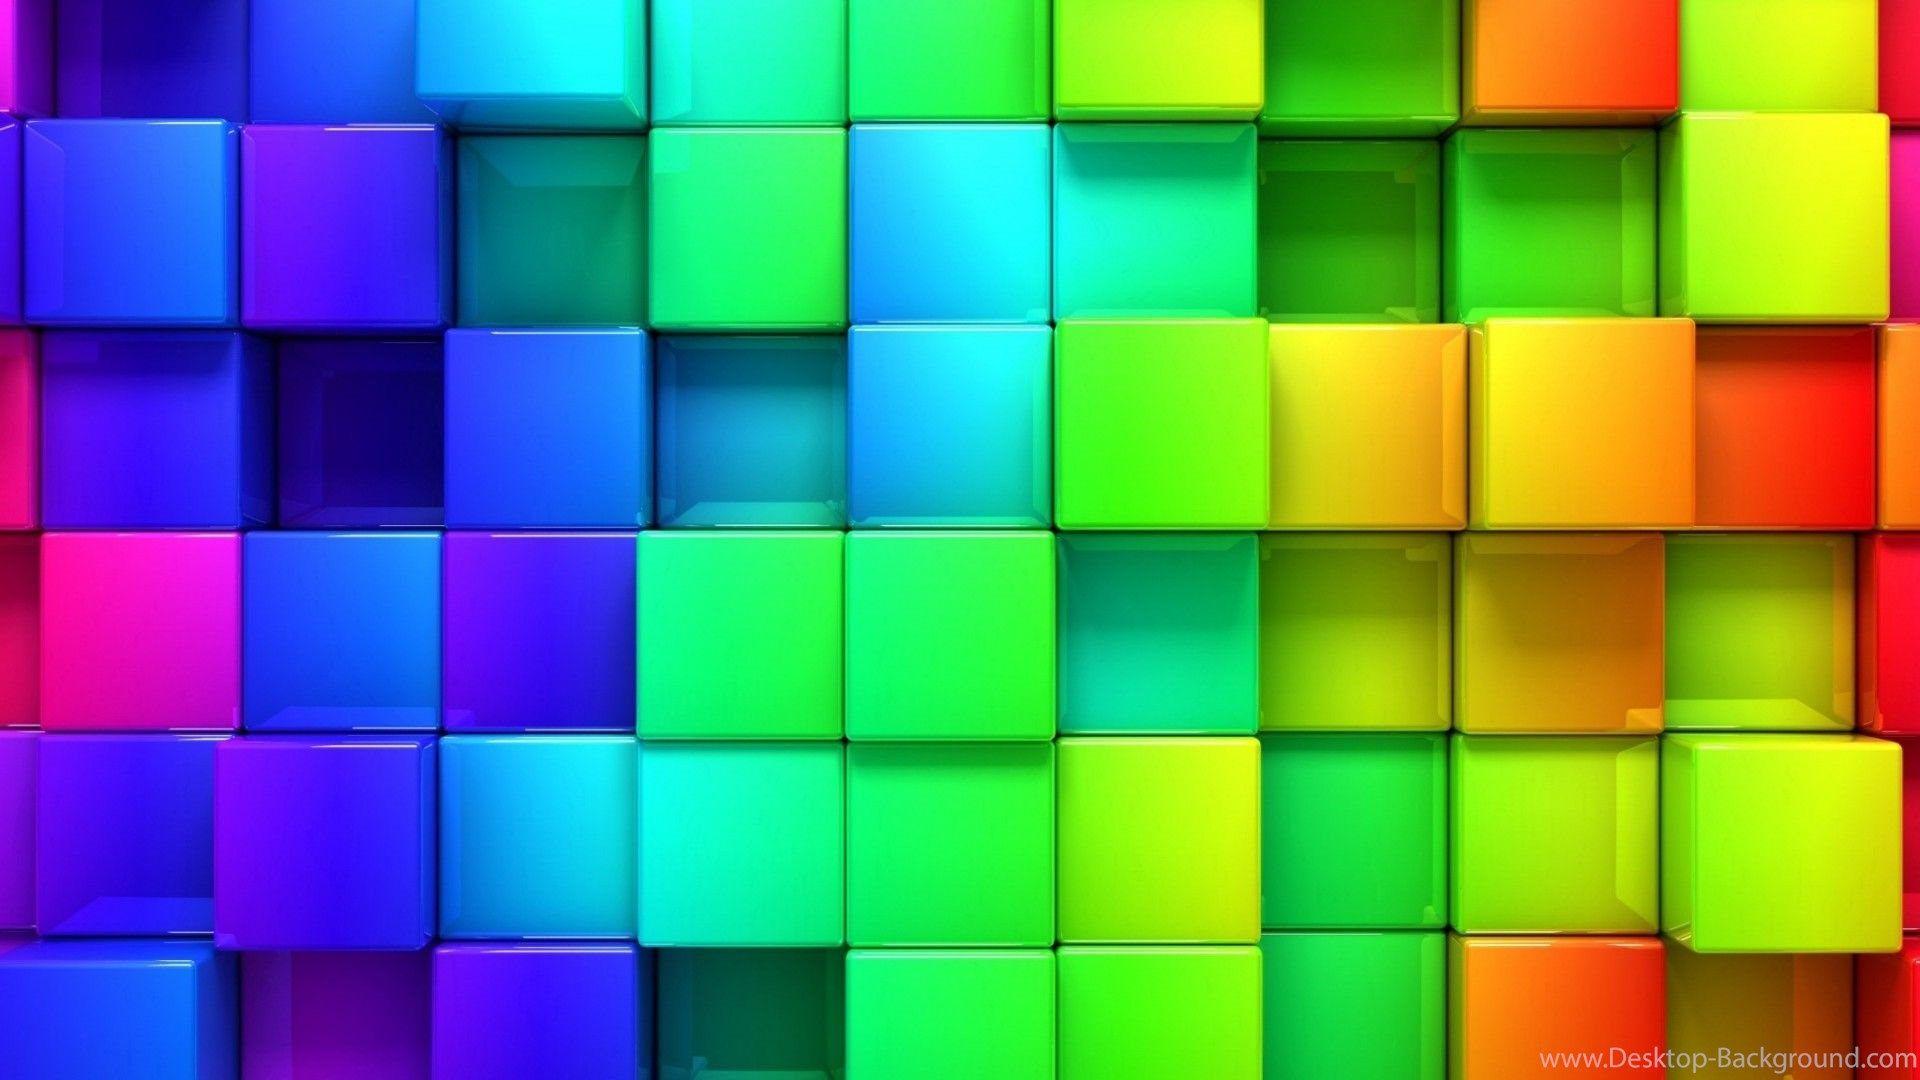 Colorful 3D Cubes Awesome Picture Wallpaper Desktop Background